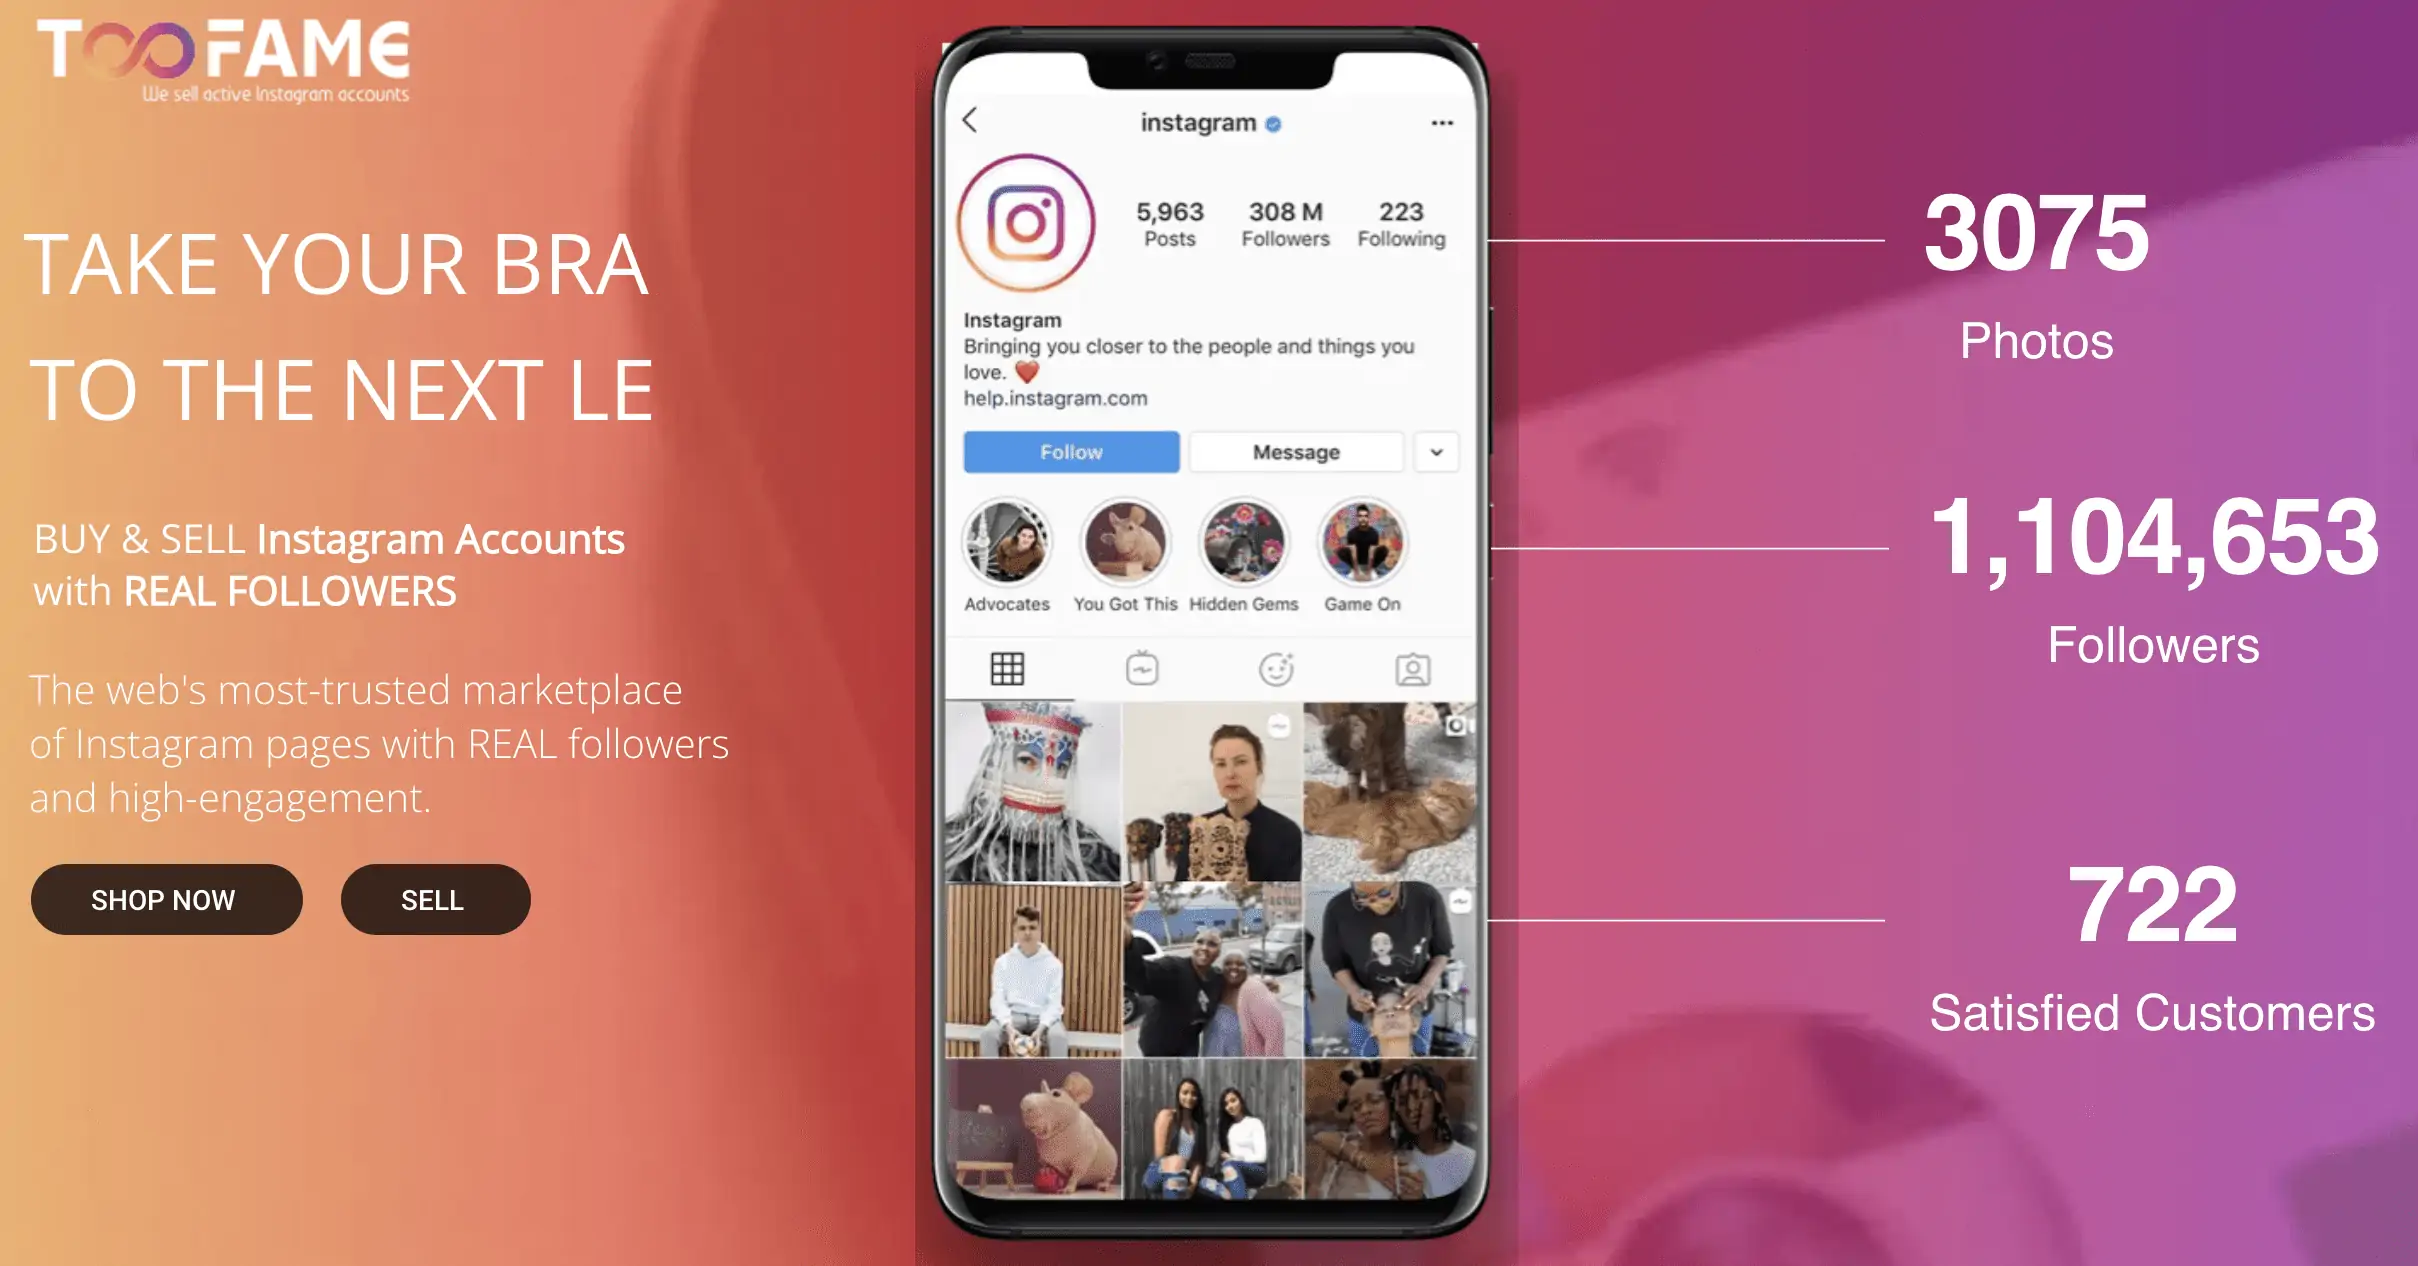 Instagram verified account available - Buy & Sell Instagram Accounts - SWAPD